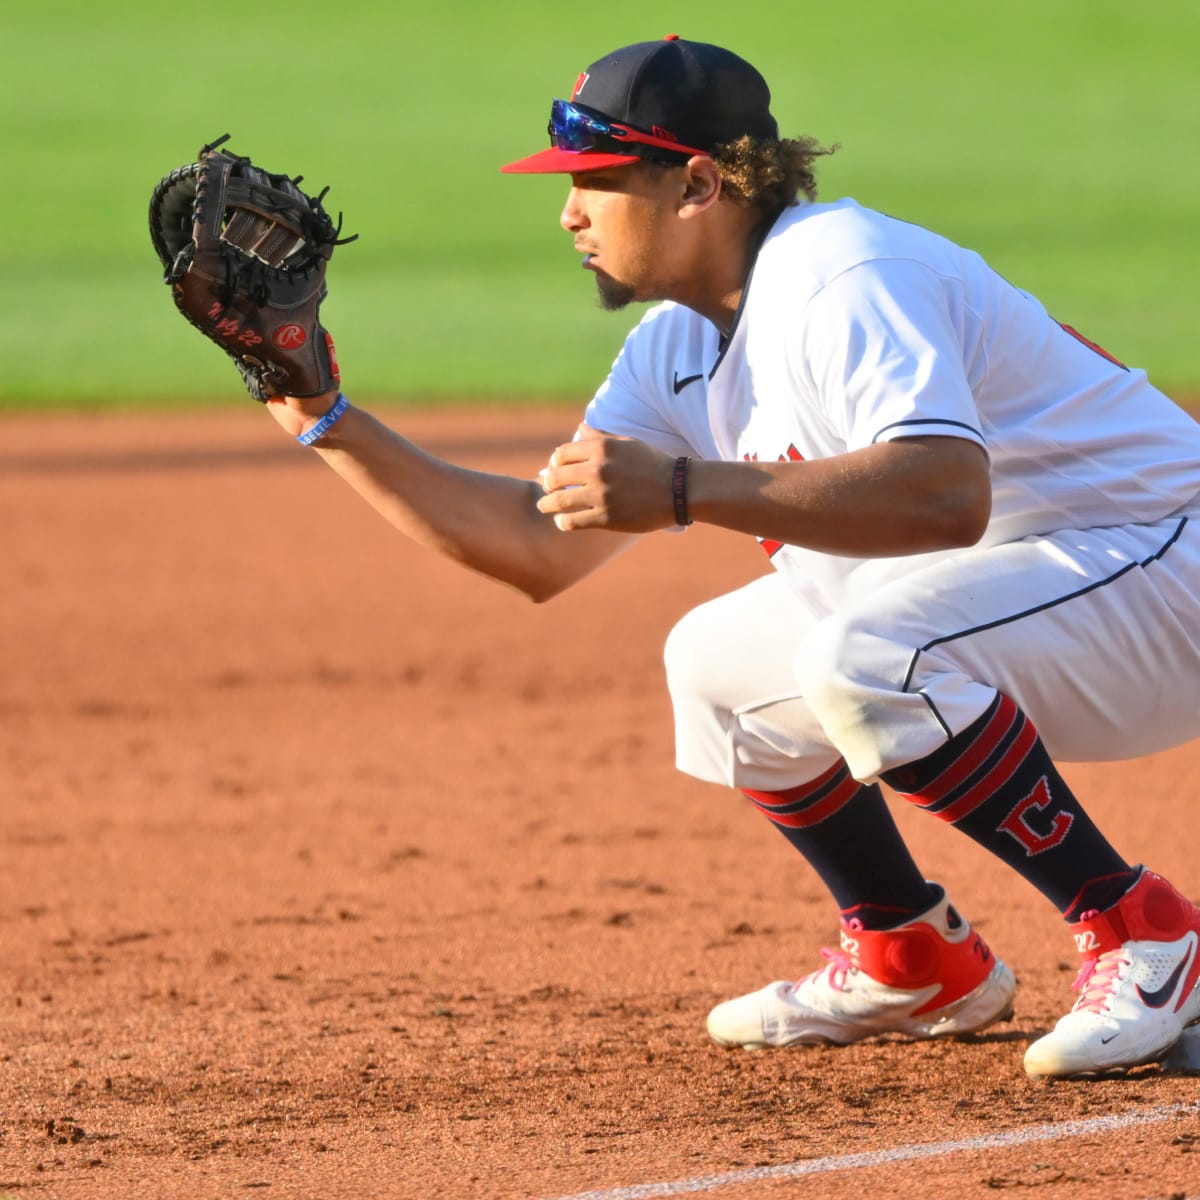 WATCH: Cleveland Guardians first baseman Josh Naylor brings out